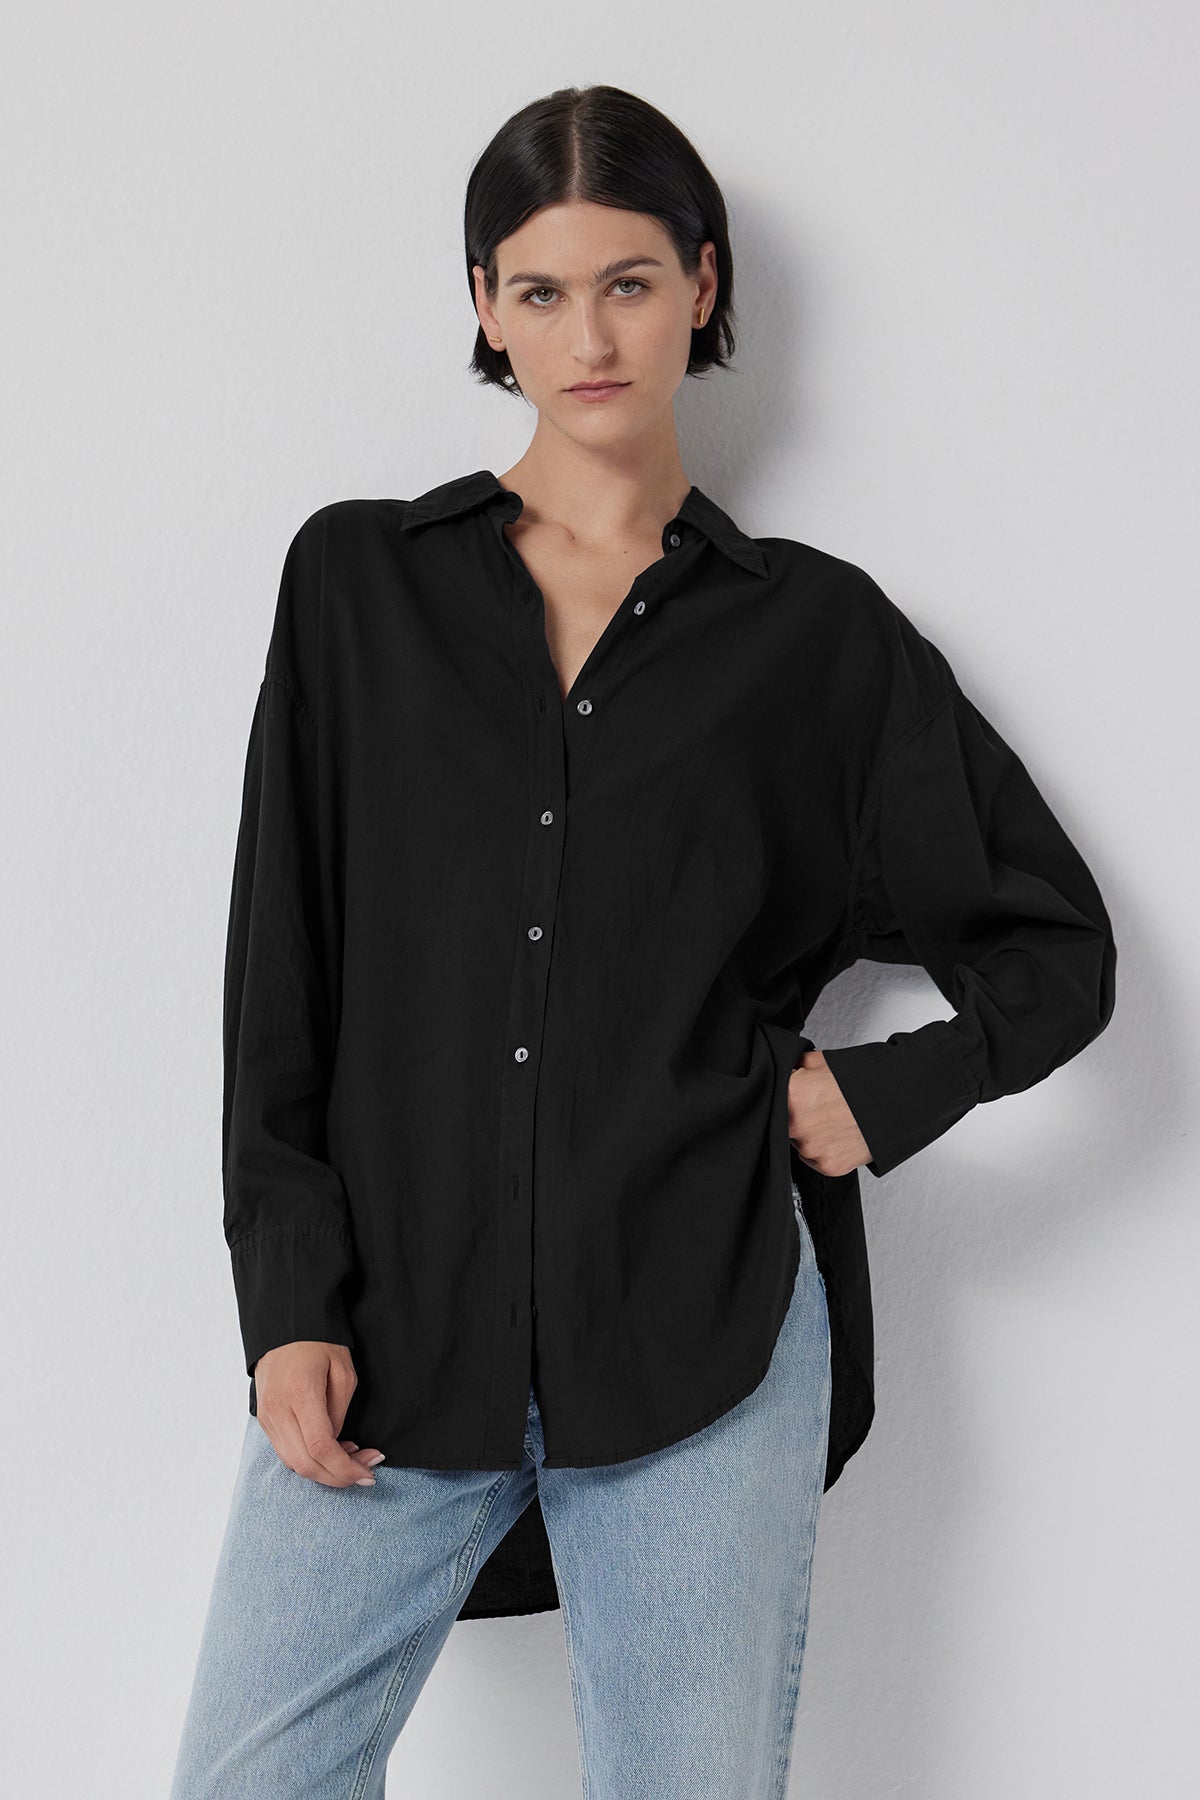   The model is wearing an oversized black REDONDO BUTTON-UP SHIRT and jeans by Velvet by Jenny Graham. 